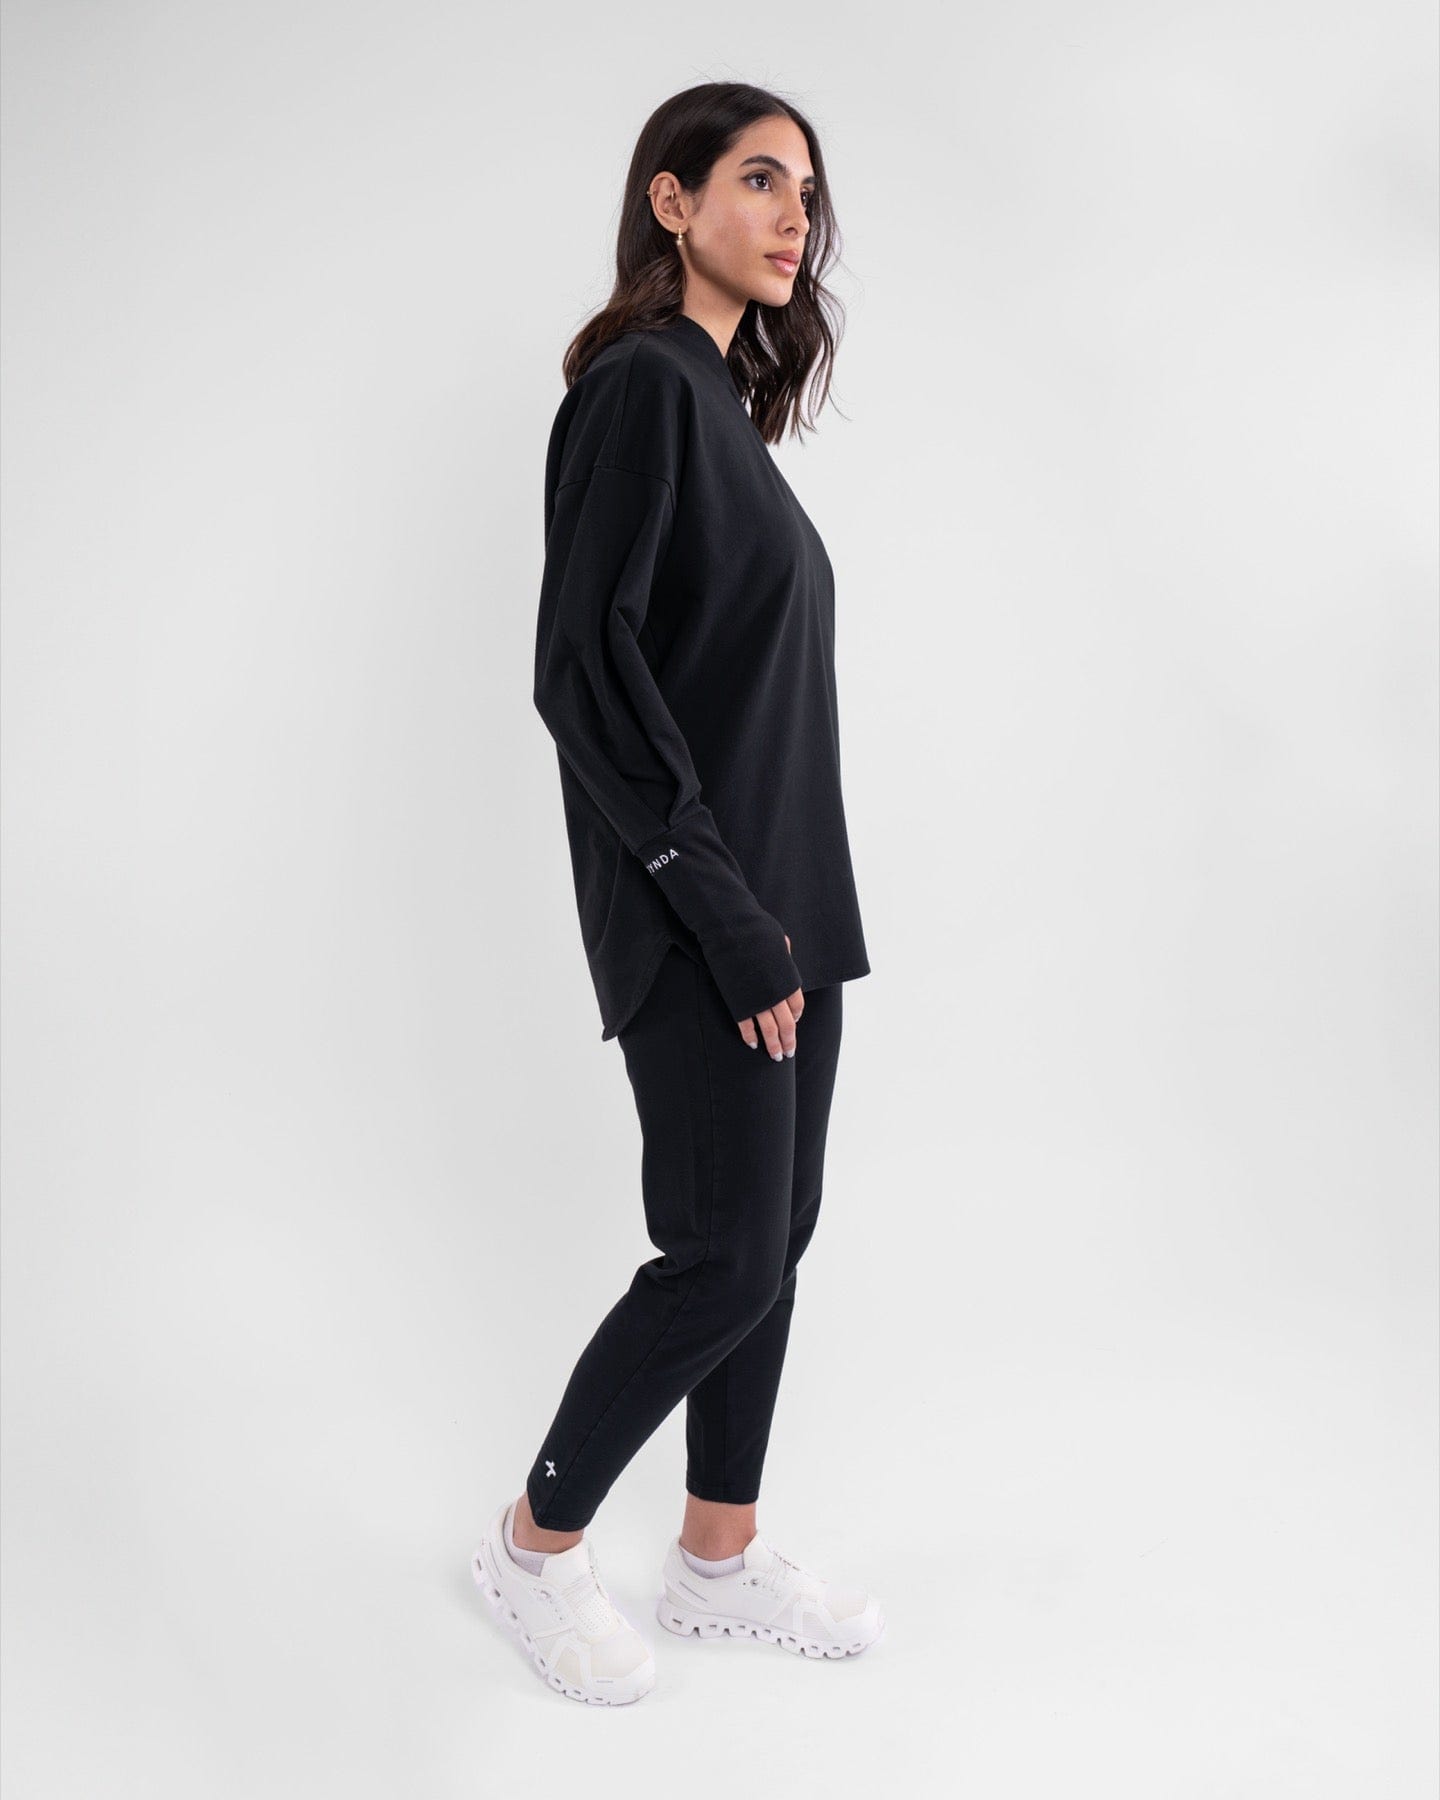 A woman in a modest athletic REHAL SWEATER by qynda and a casual Black outfit stands against a plain background.